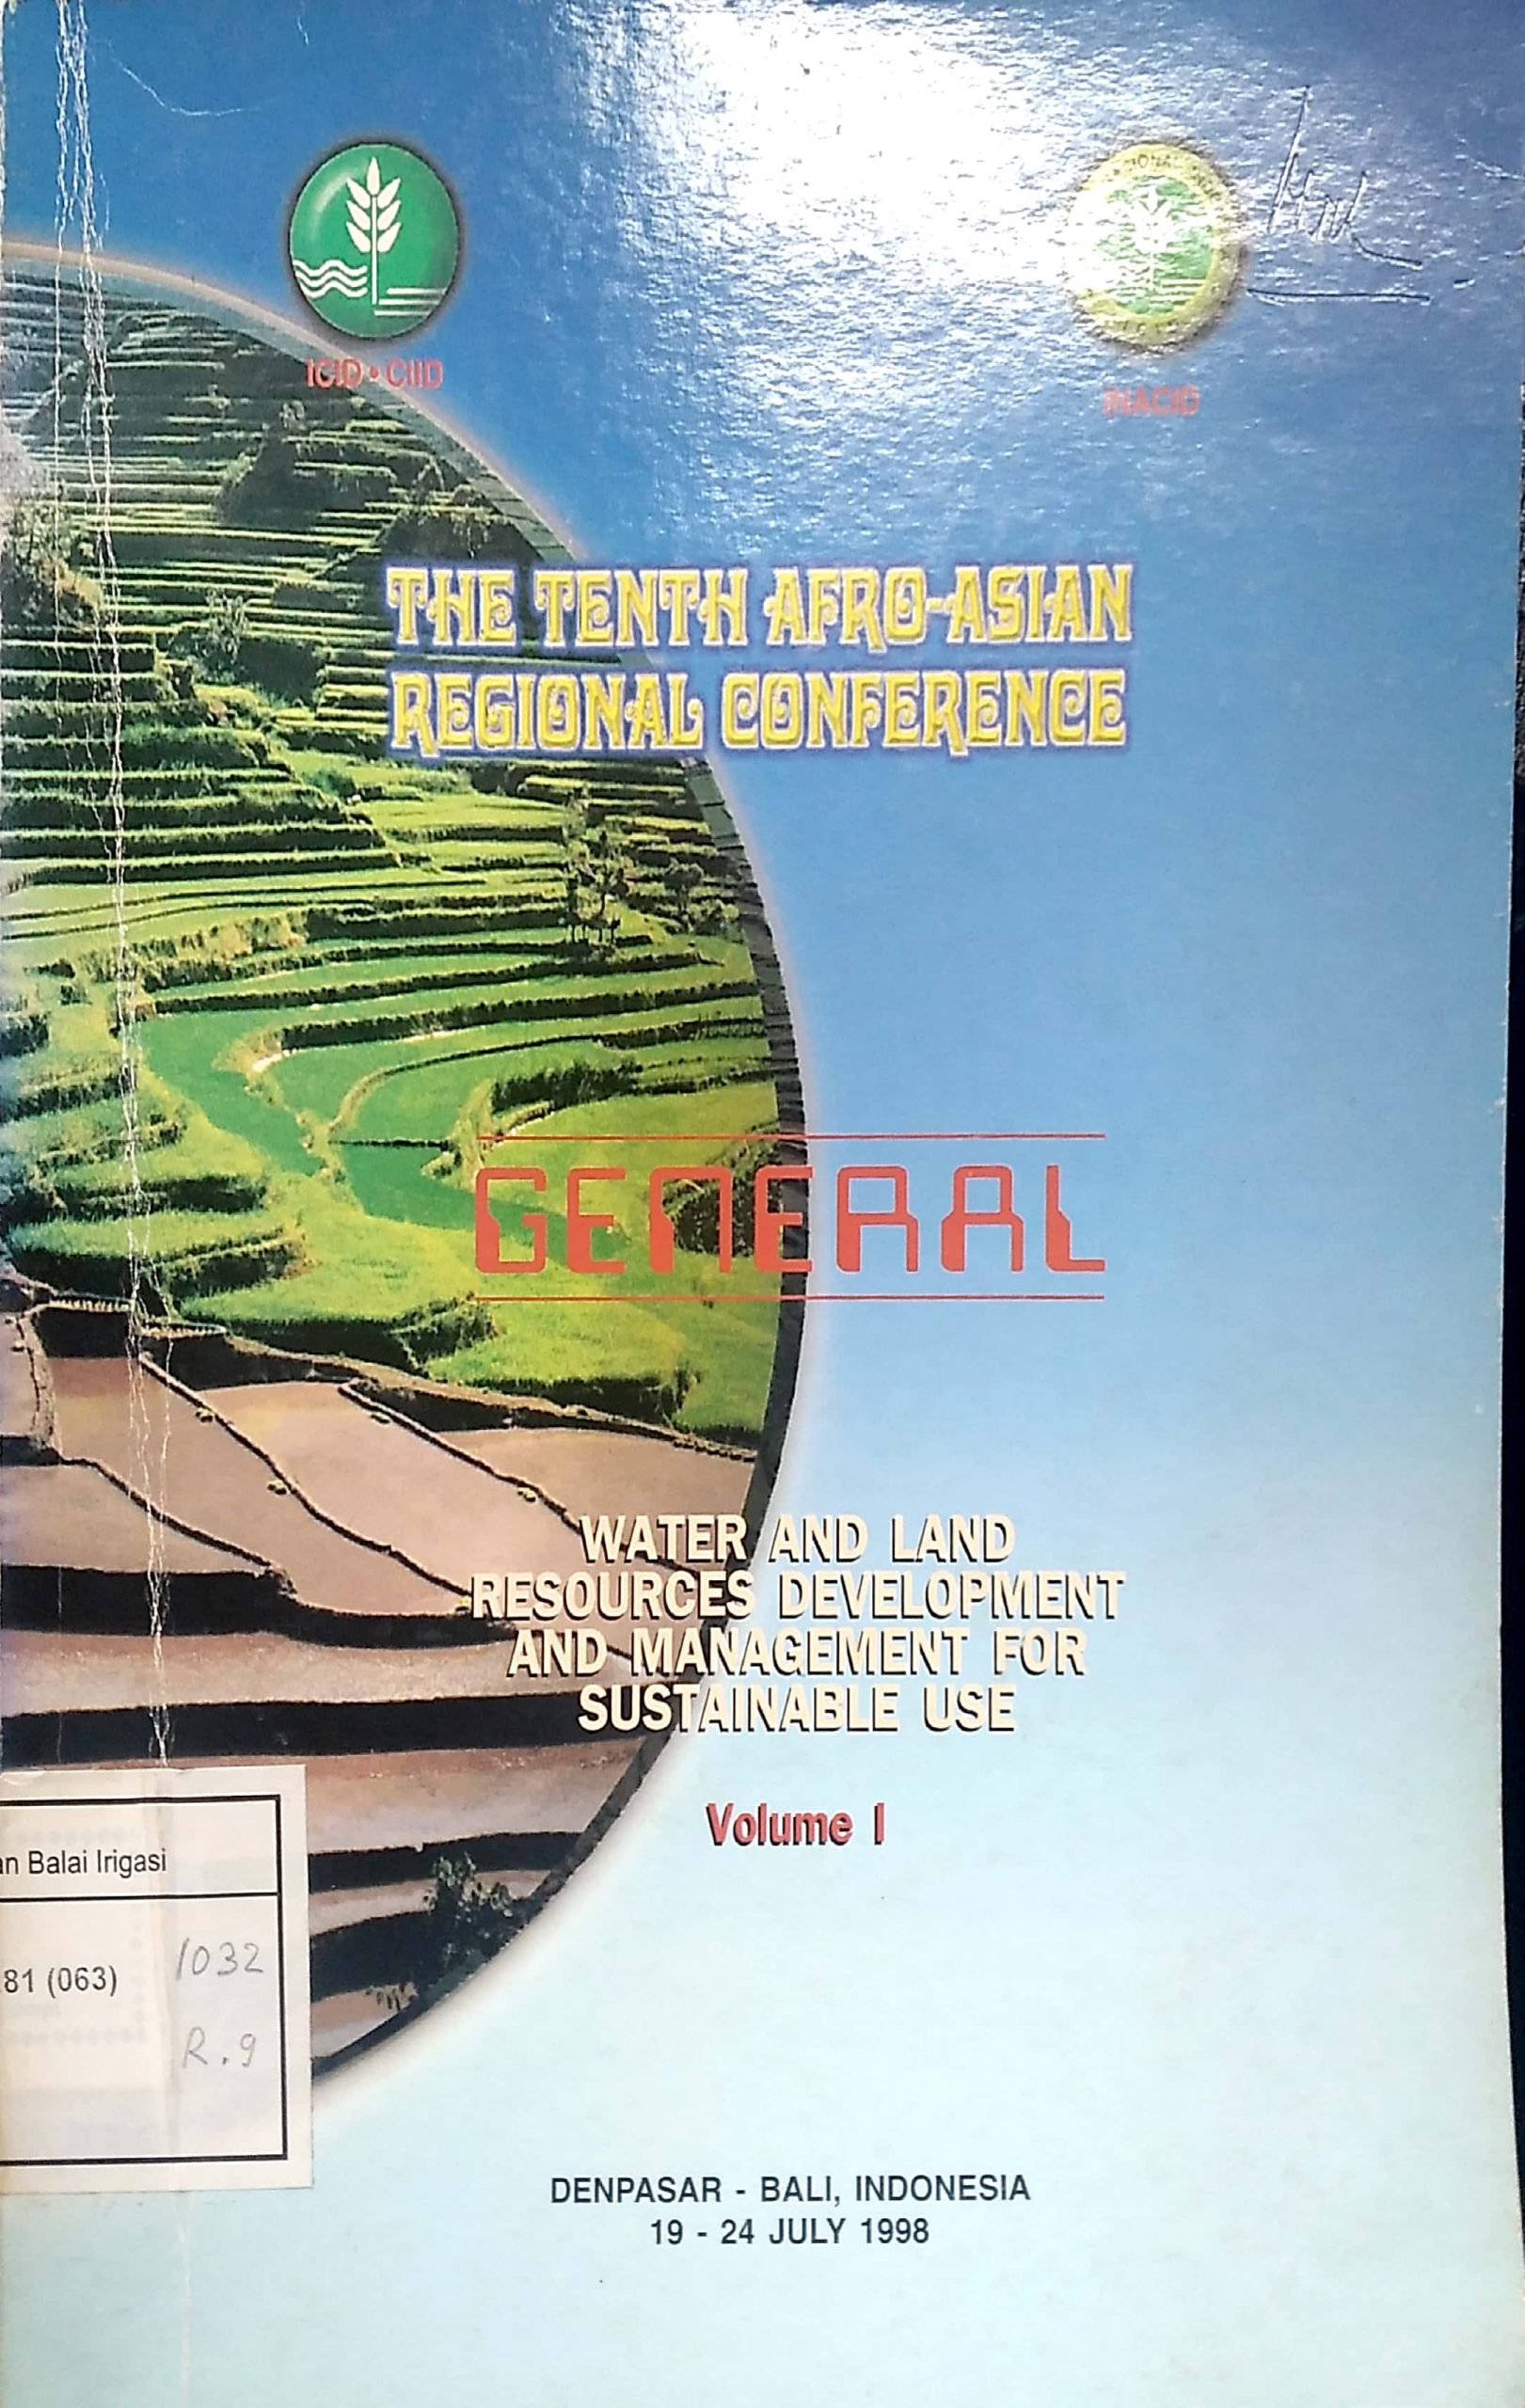 The Tenth Afro-Asian Regional Conference Volume 1